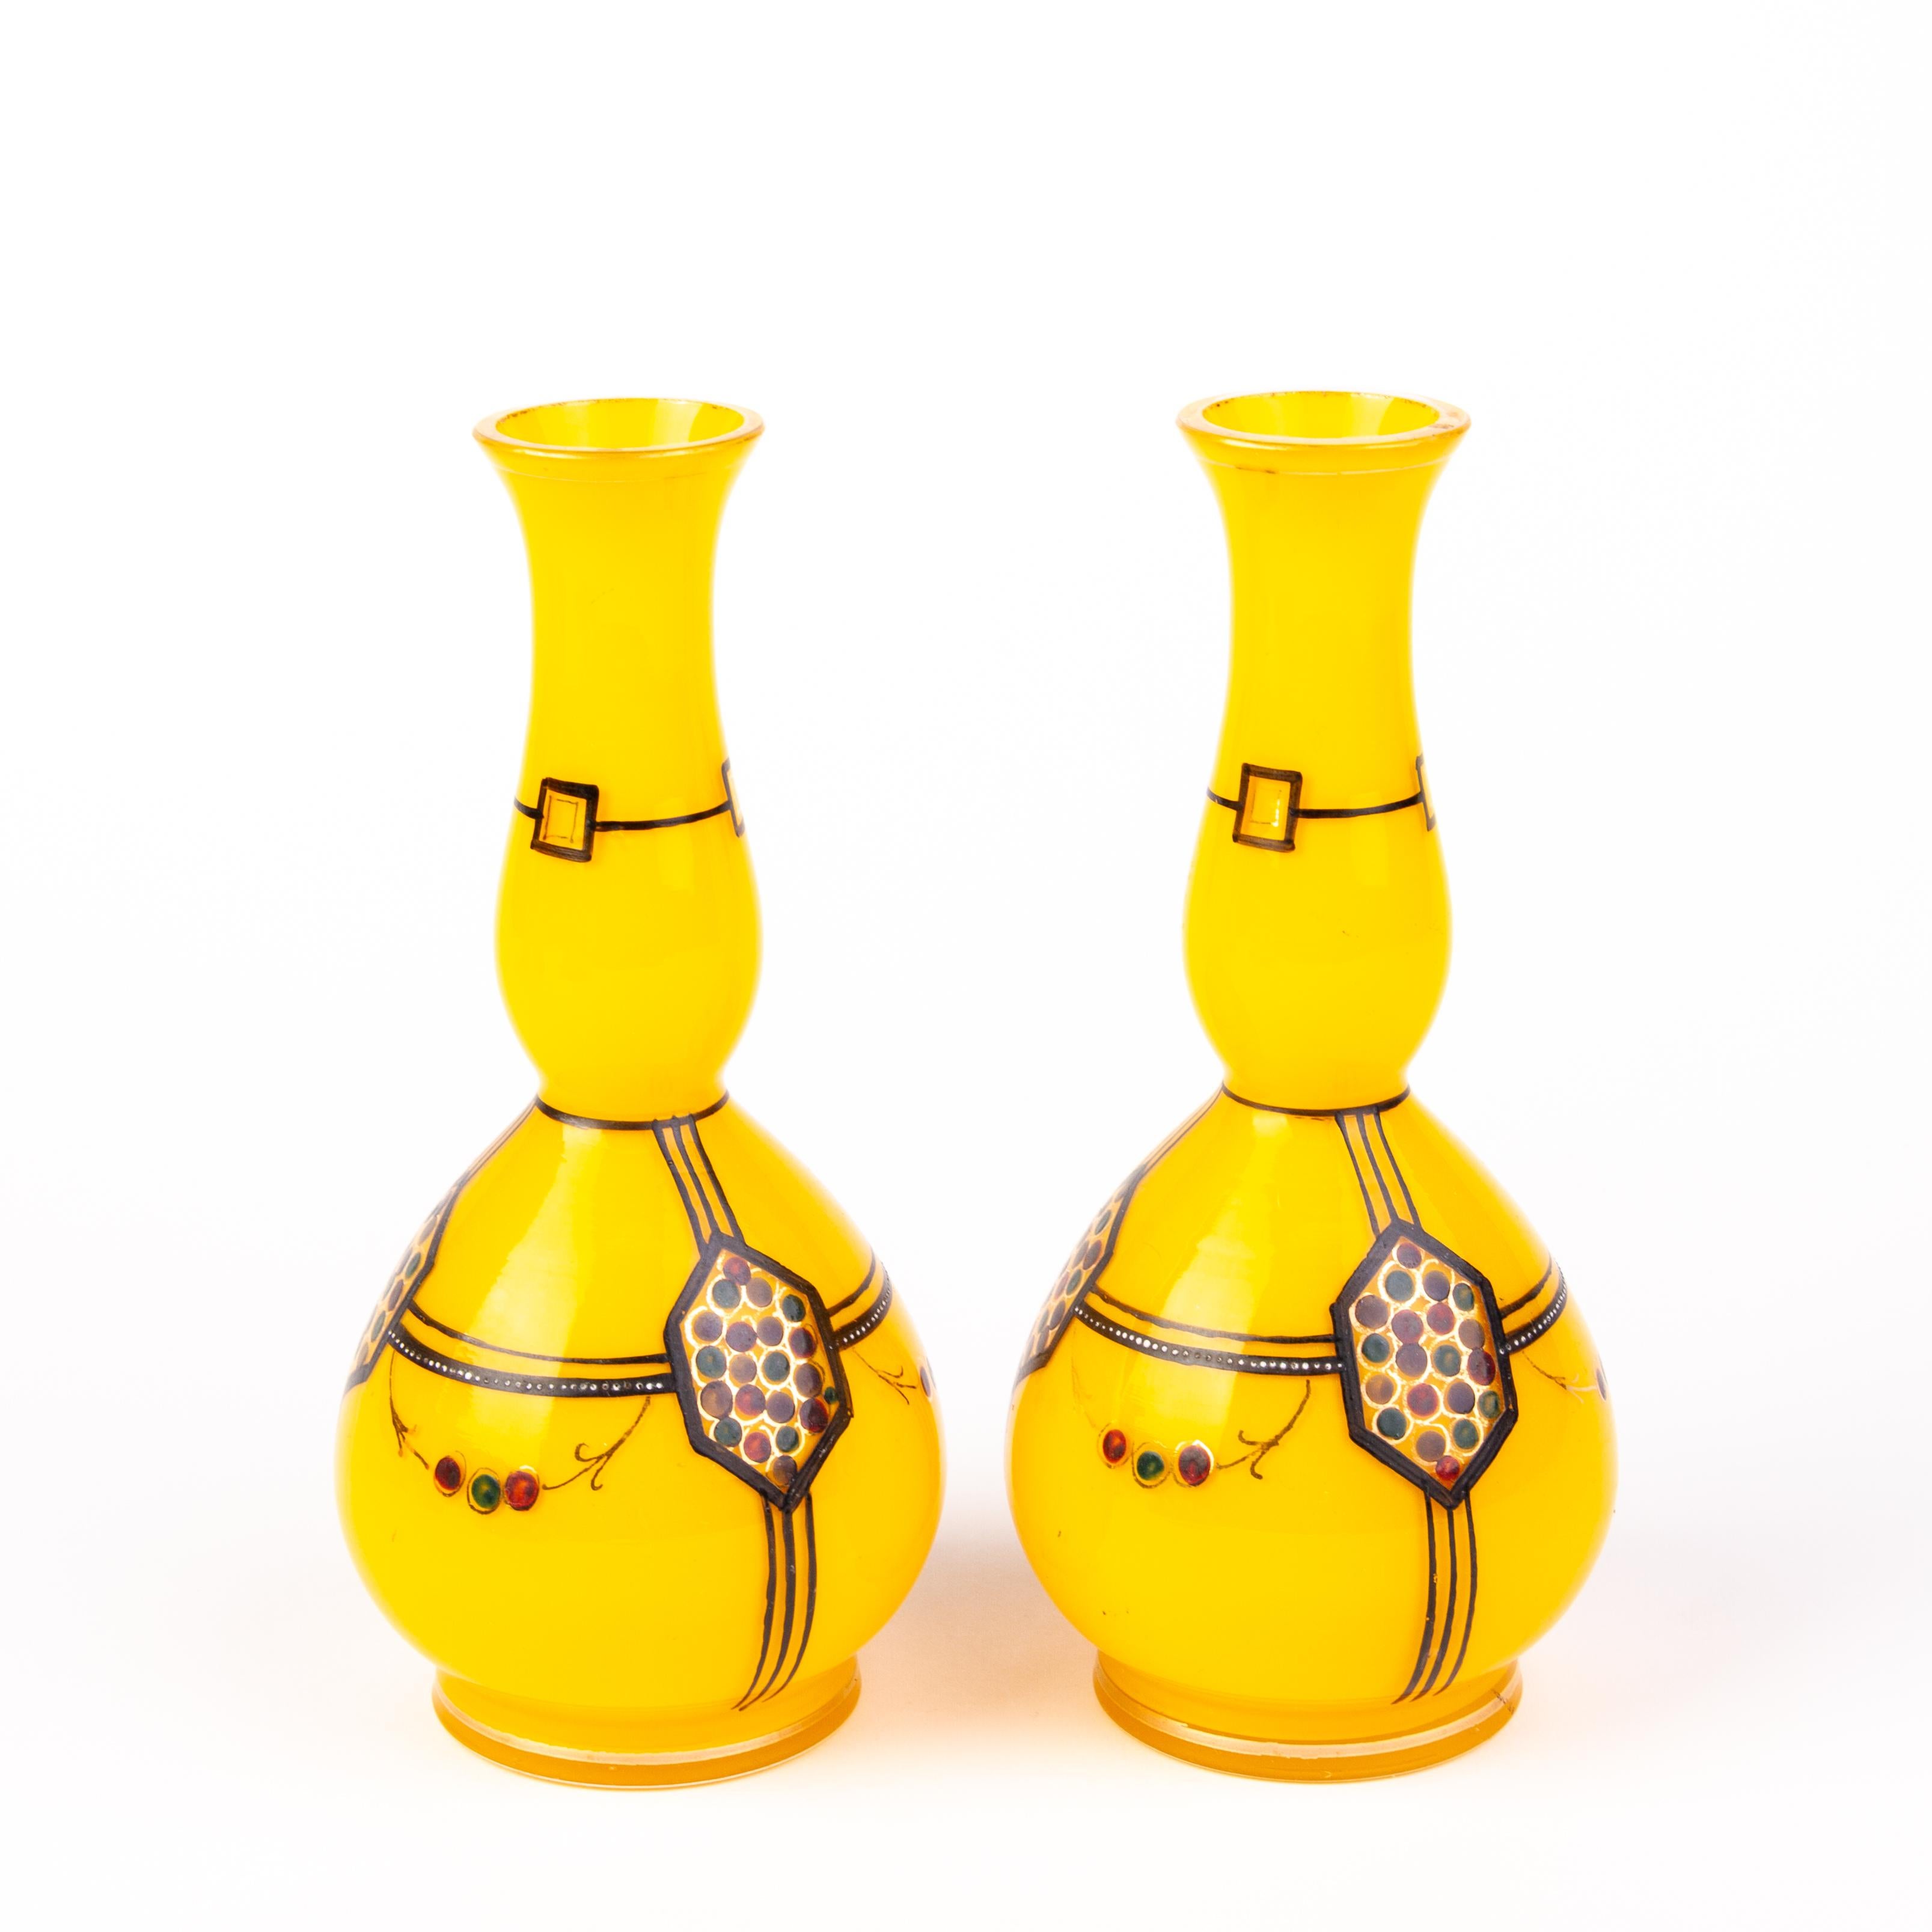 In good condition
From a private collection
Pair of Loetz Style Tango Glass Bohemian Art Nouveau Baluster Gourd Vases
